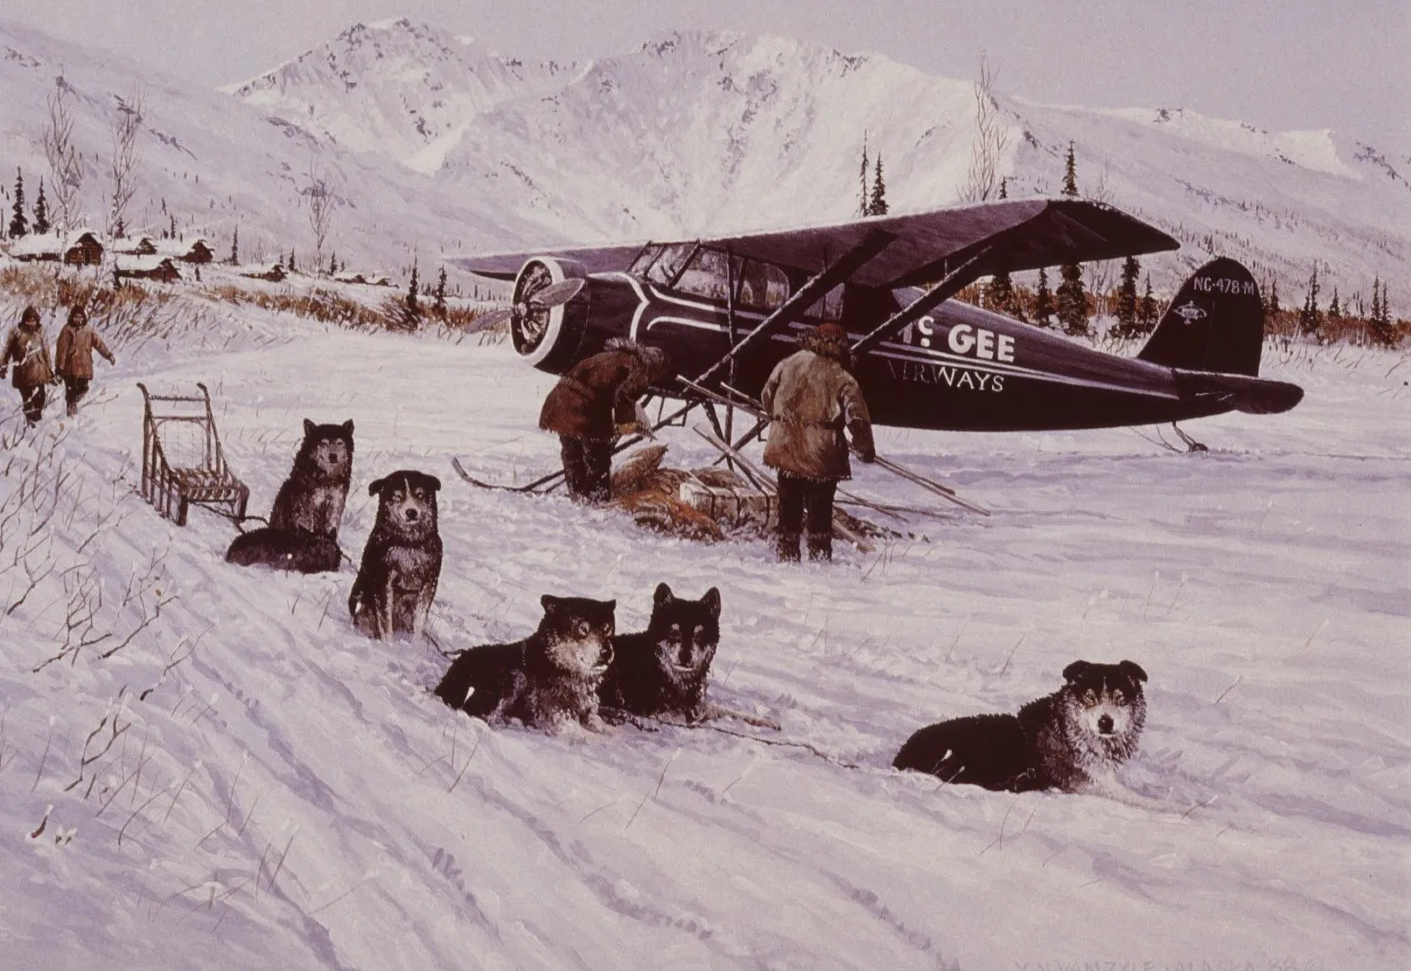 McGee Airways during its fur trading days.